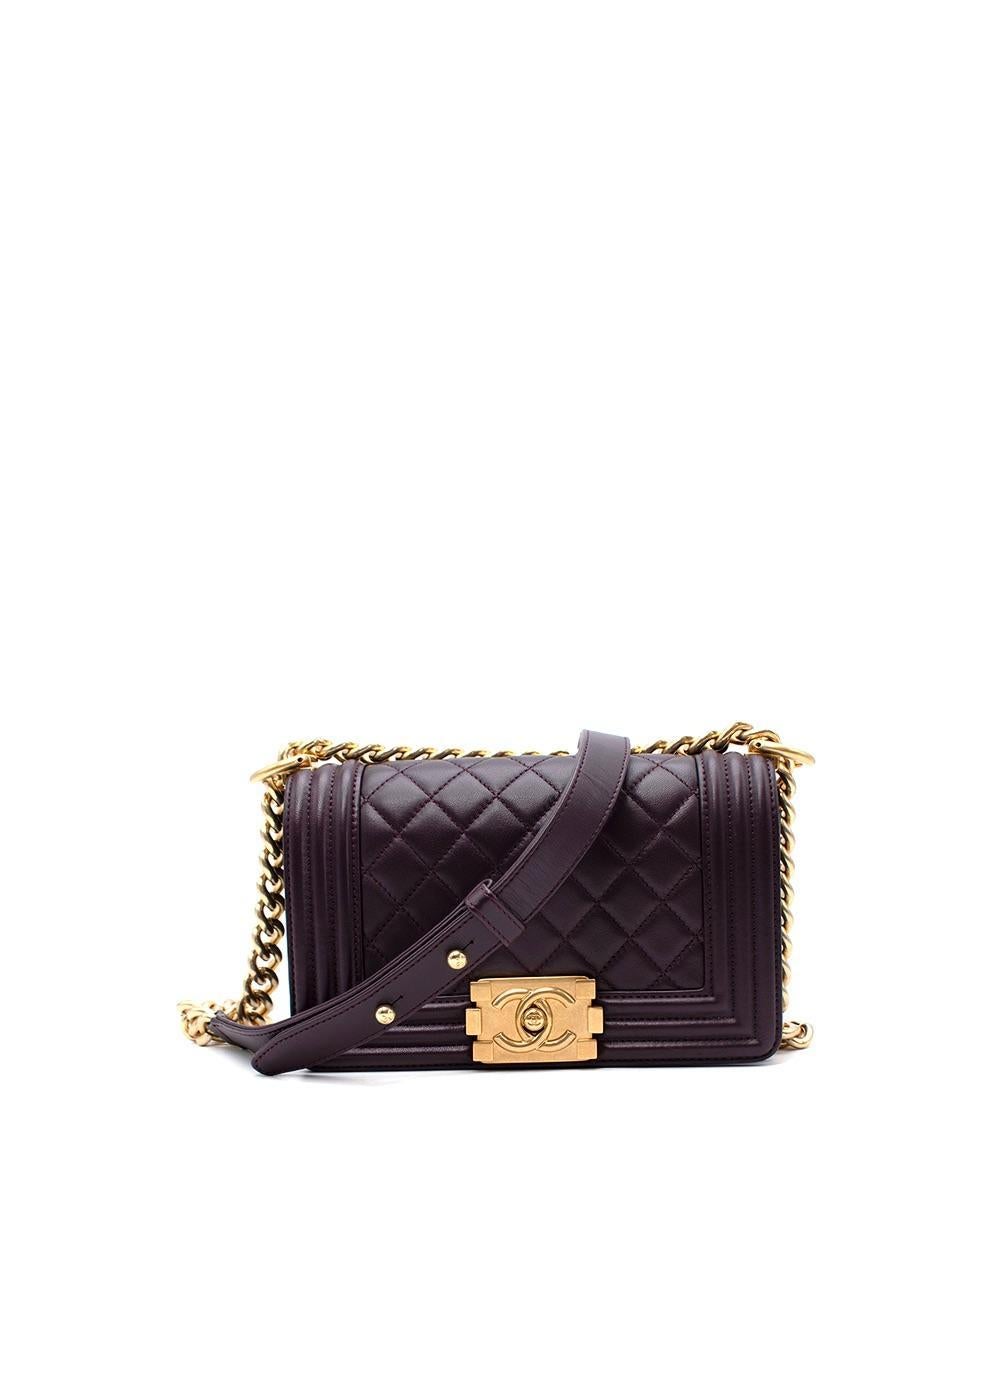 Chanel Small Purple Lambskin Boy Bag

- Classic Boy style with a full front flap rendered in warm plum purple
- CC push-lock closure
- Gold chain link and dark purple leather padded shoulder/crossbody strap.
- Gold hardware
-